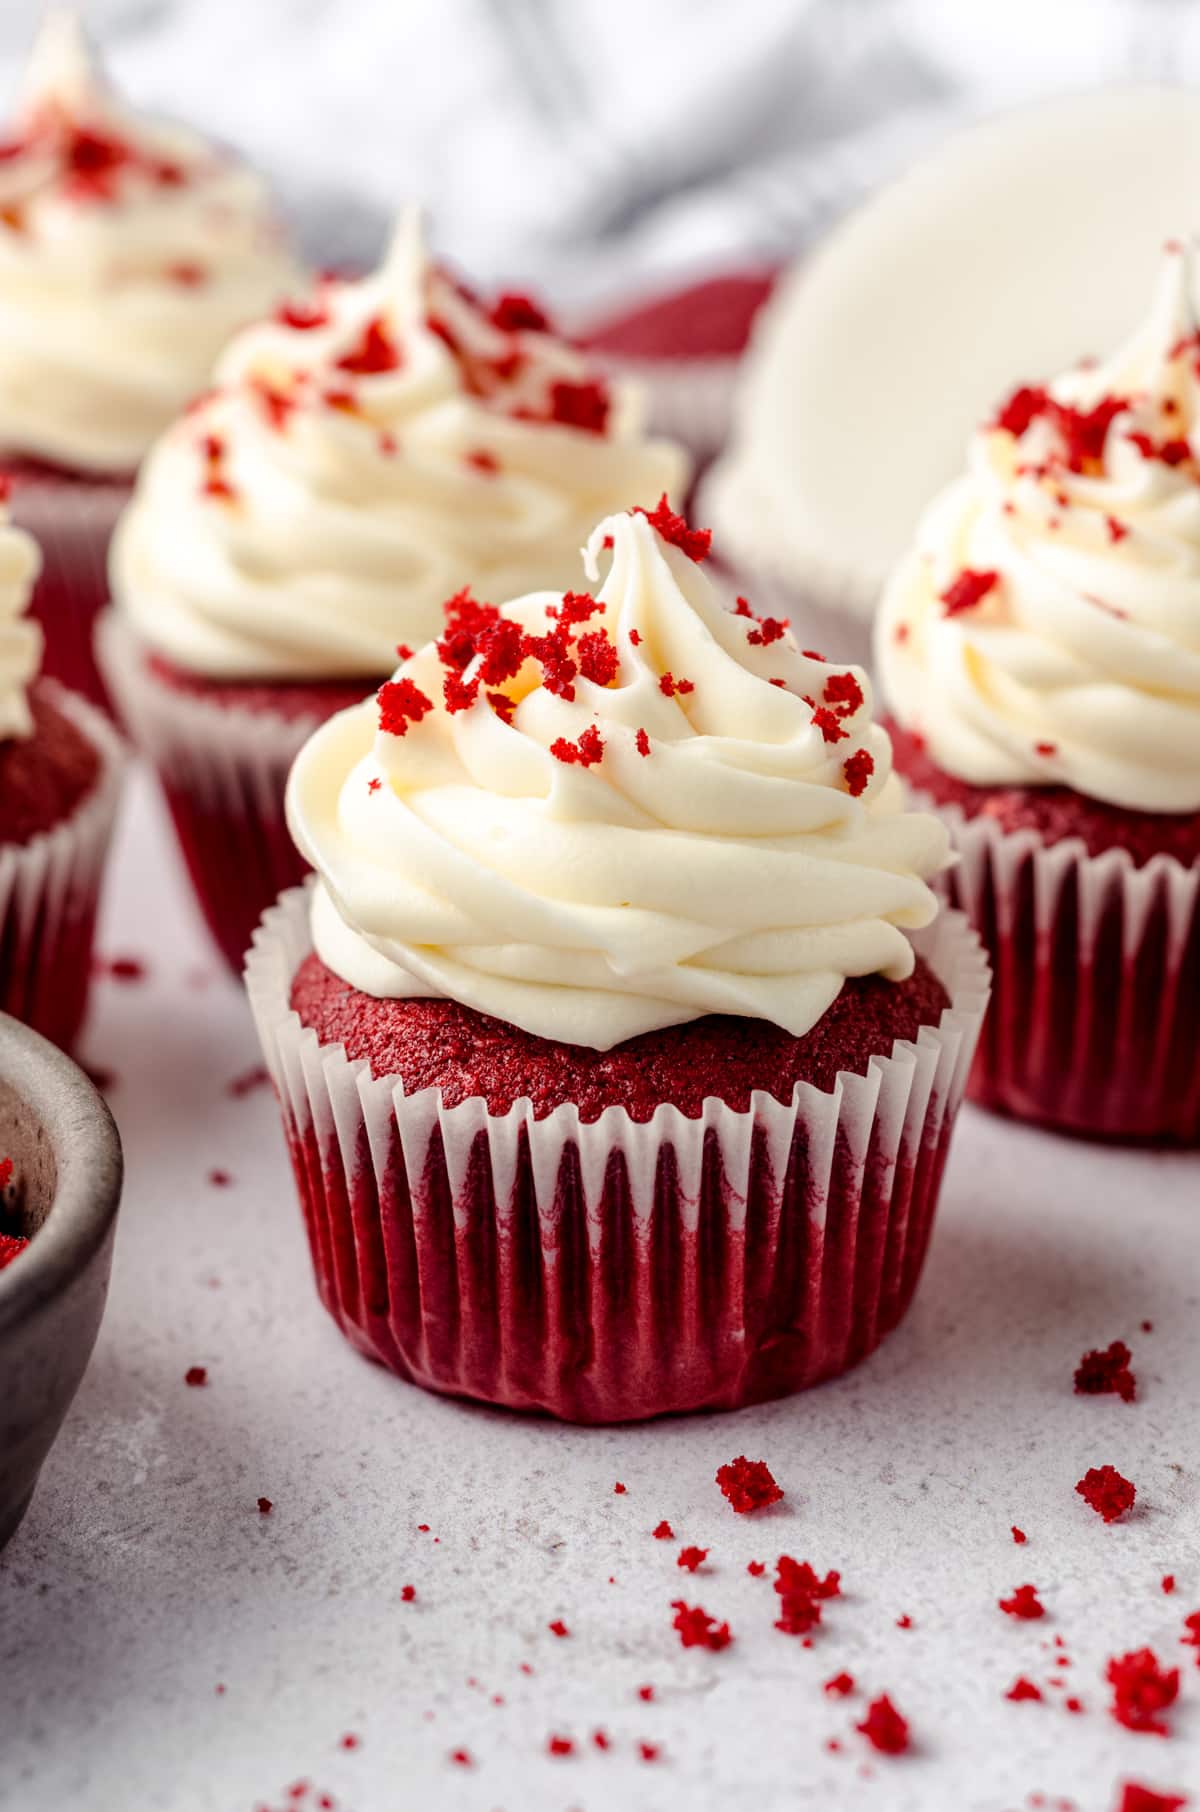 Red velvet cupcakes with cream cheese frosting and red velvet crumbs on top.